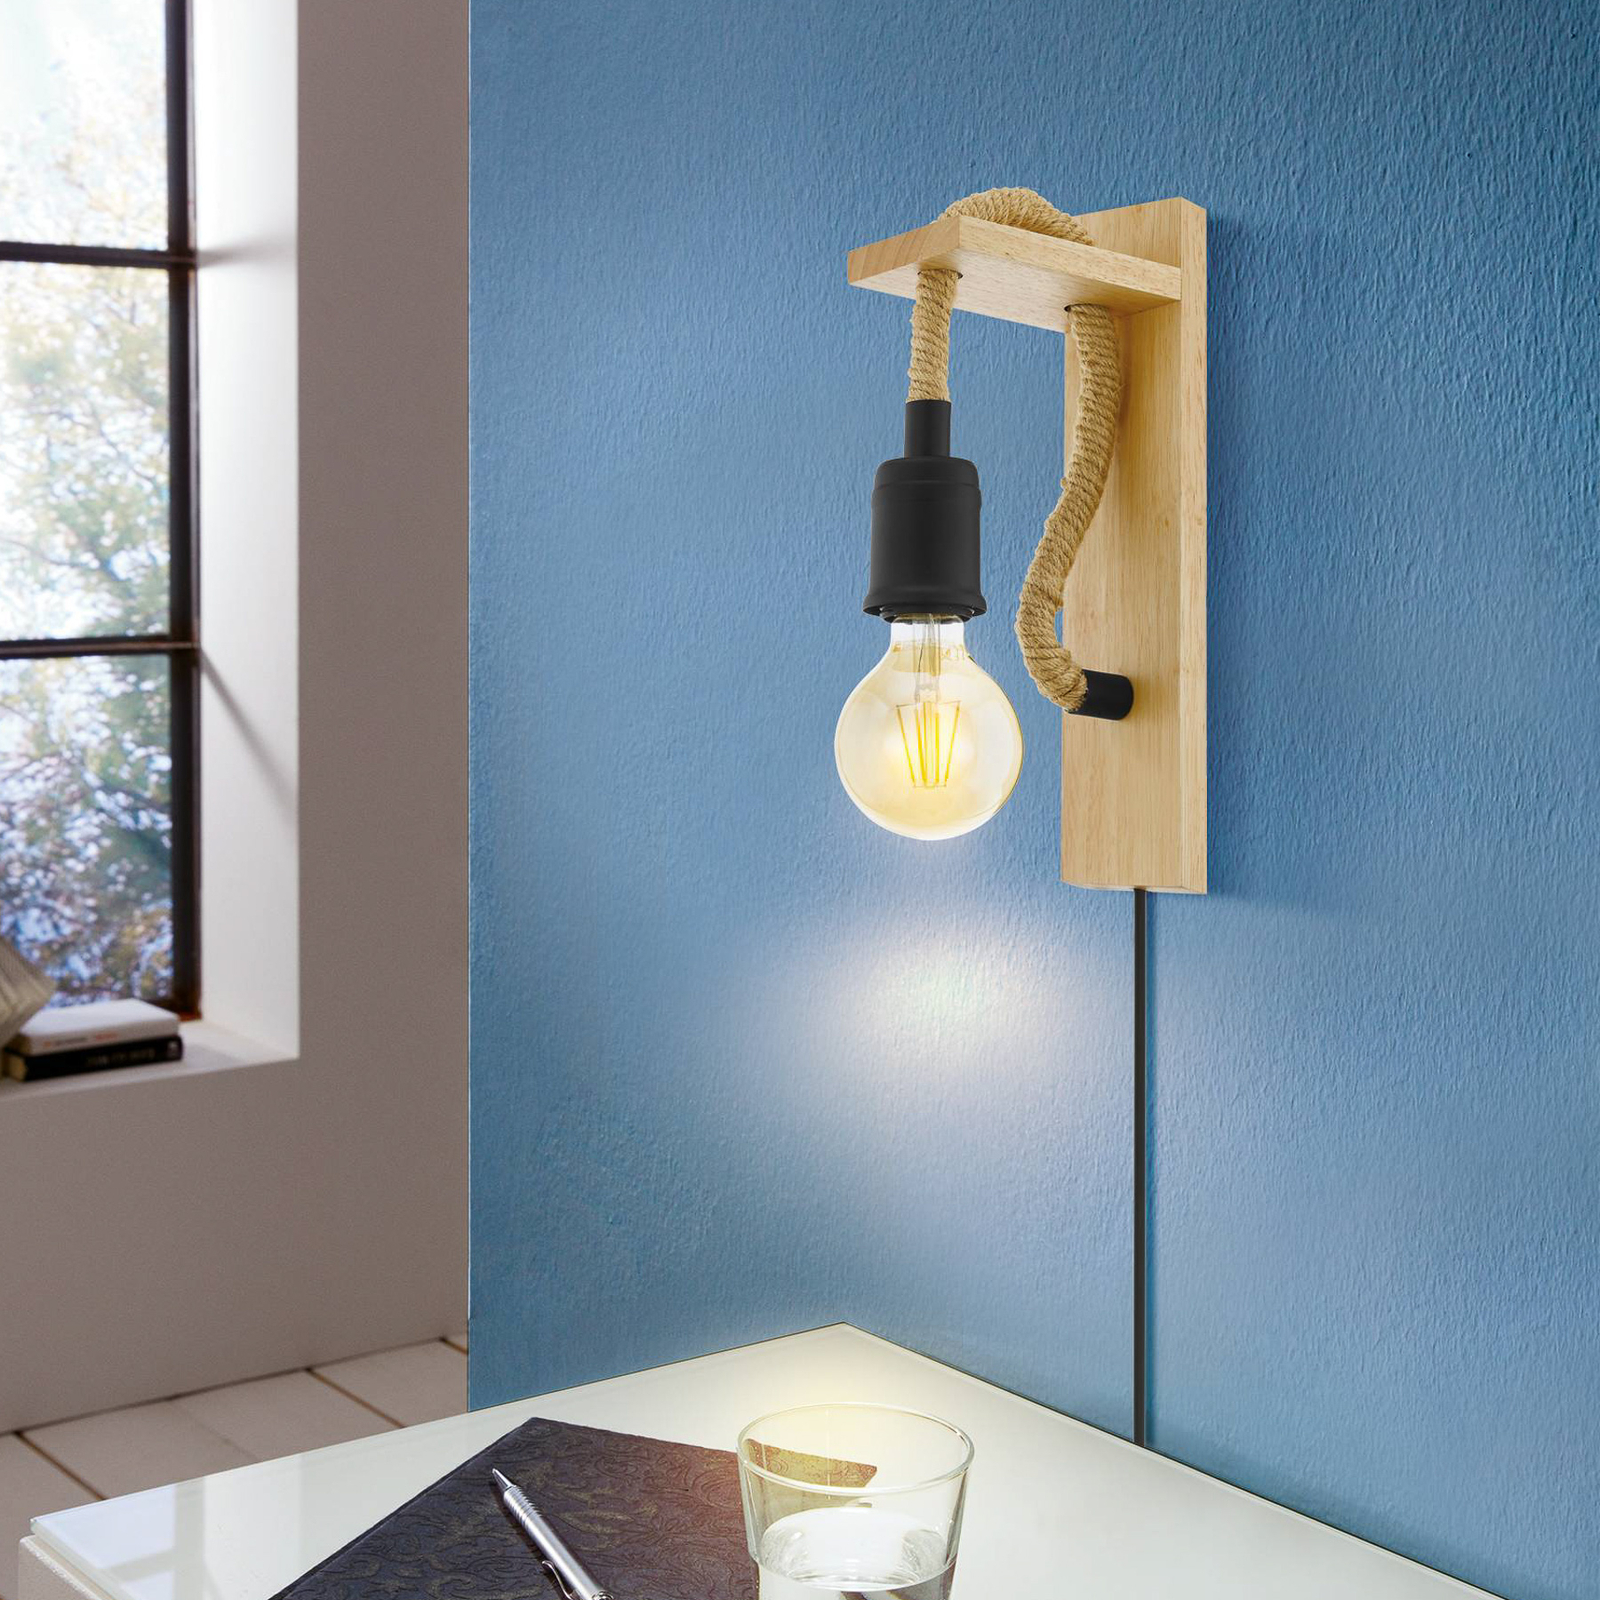 Rampside wall light, wood and rope, shadeless